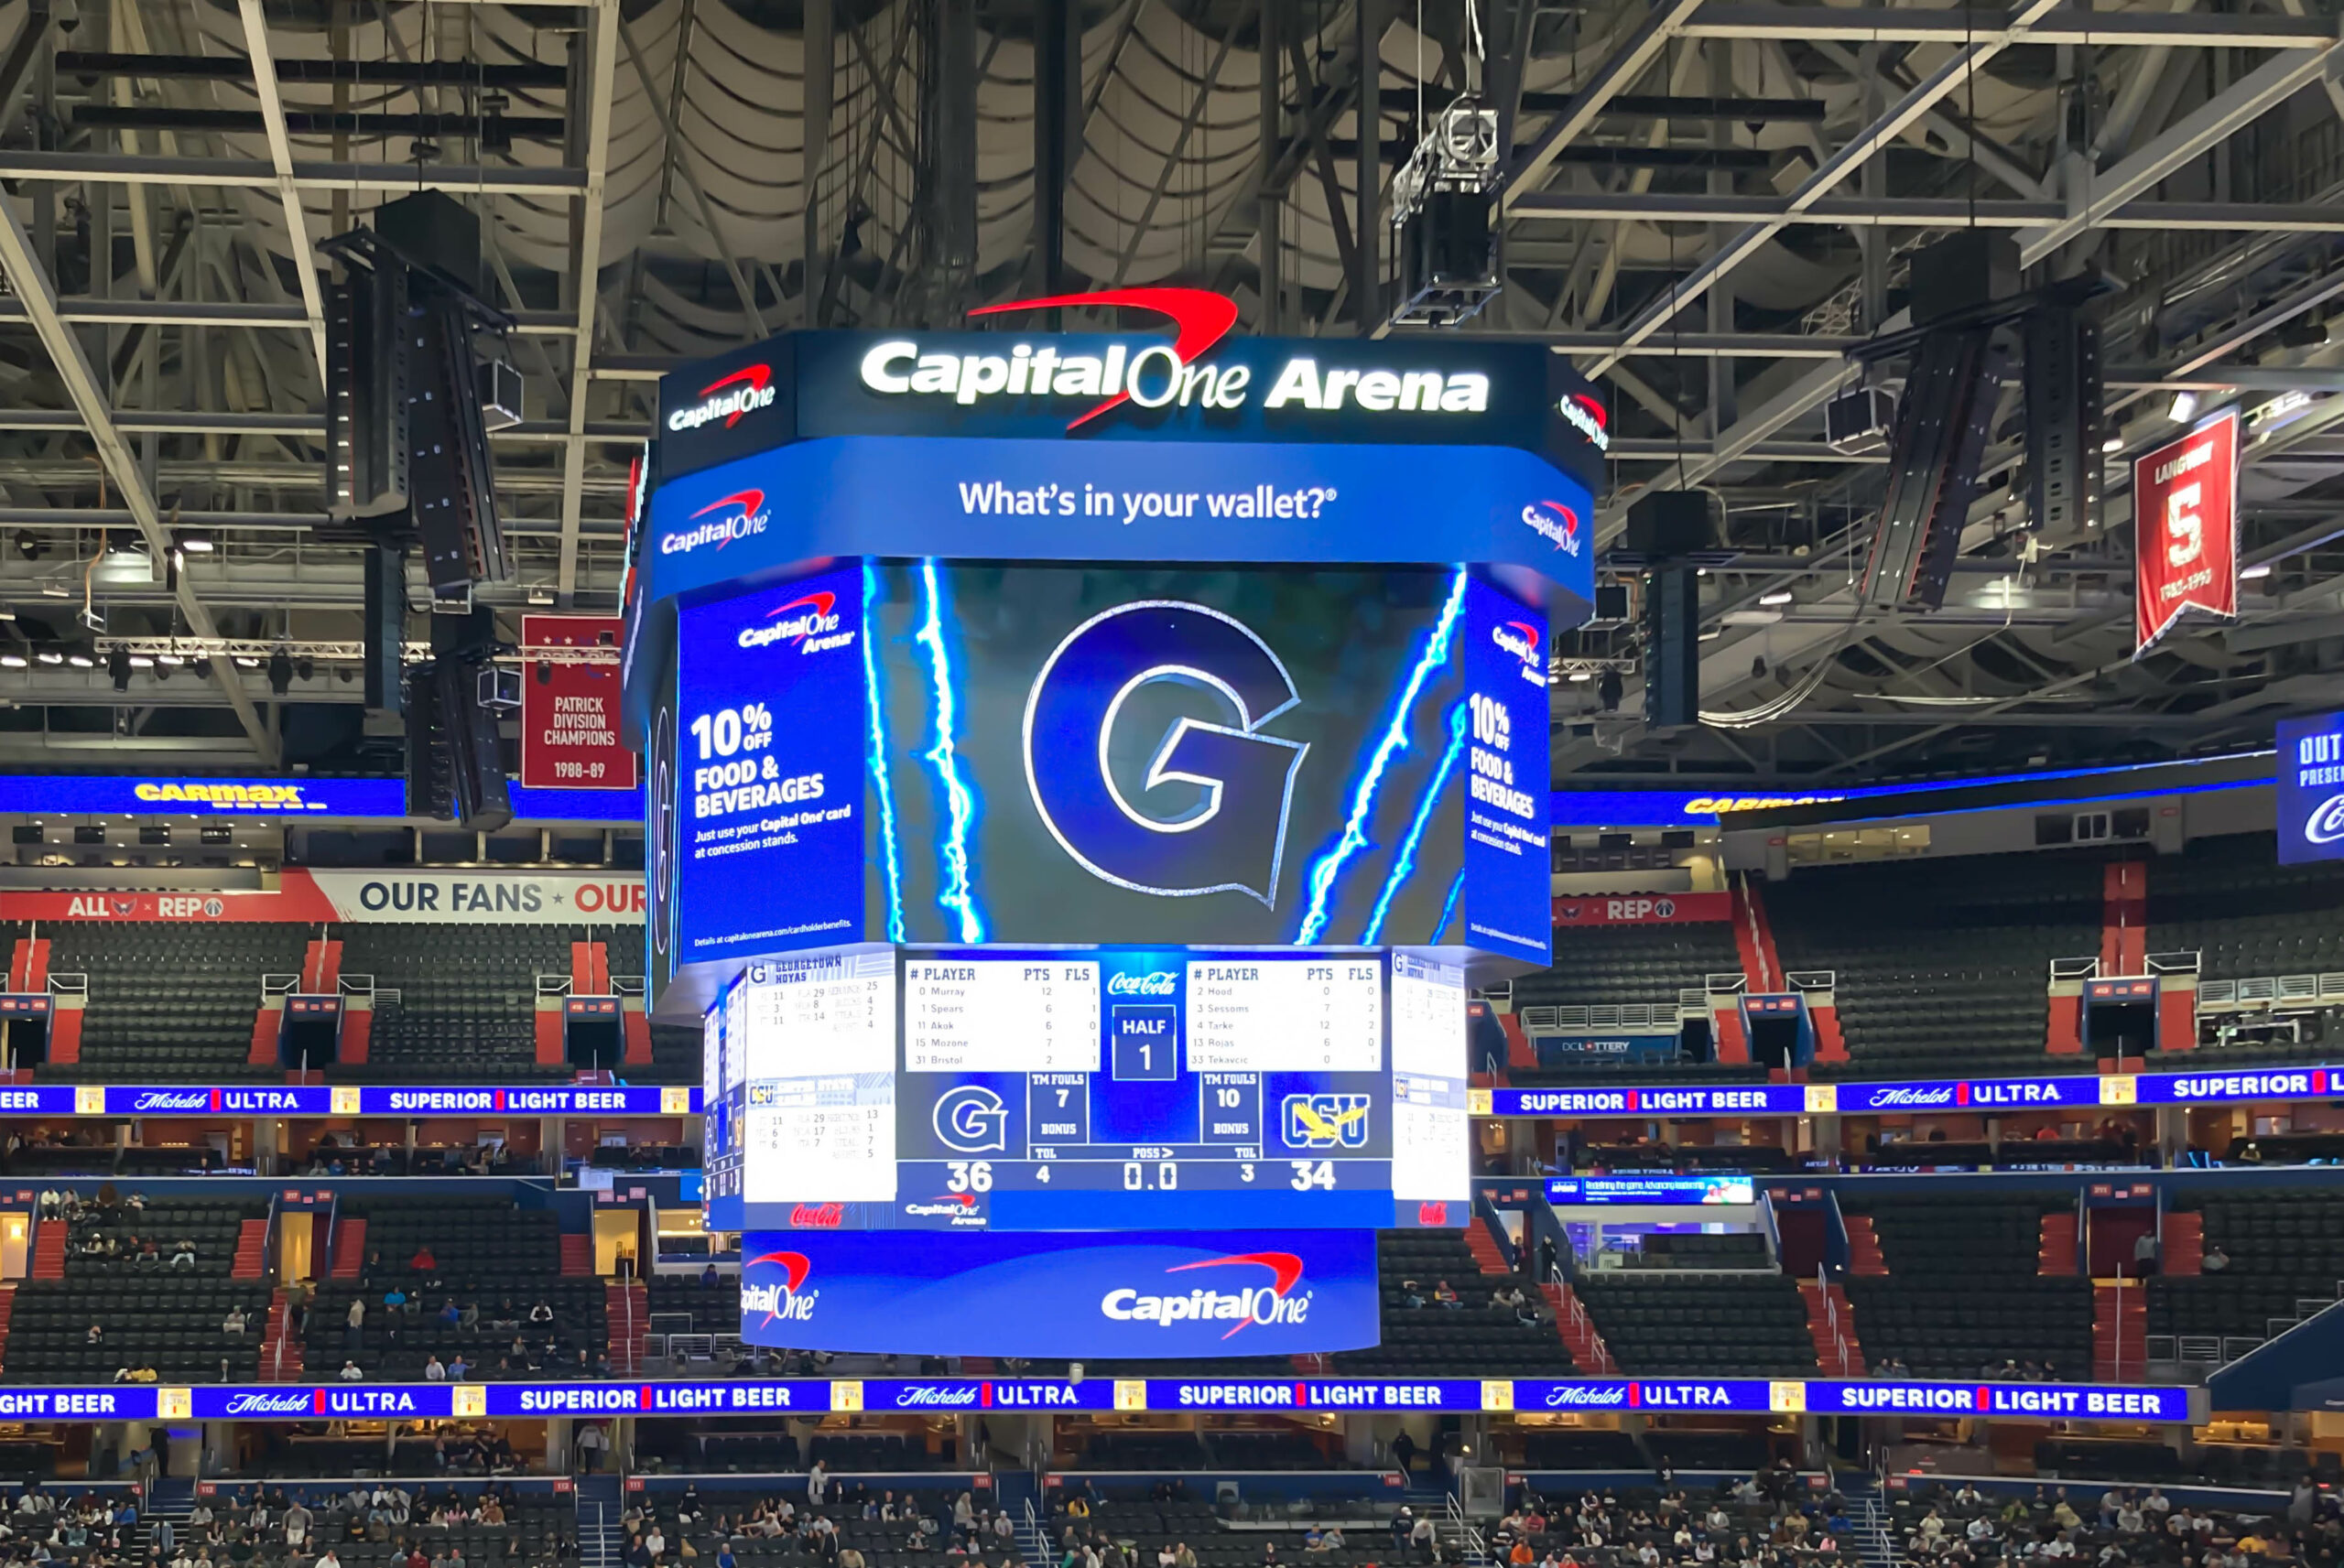 Capital One Arena in Washington, D.C.